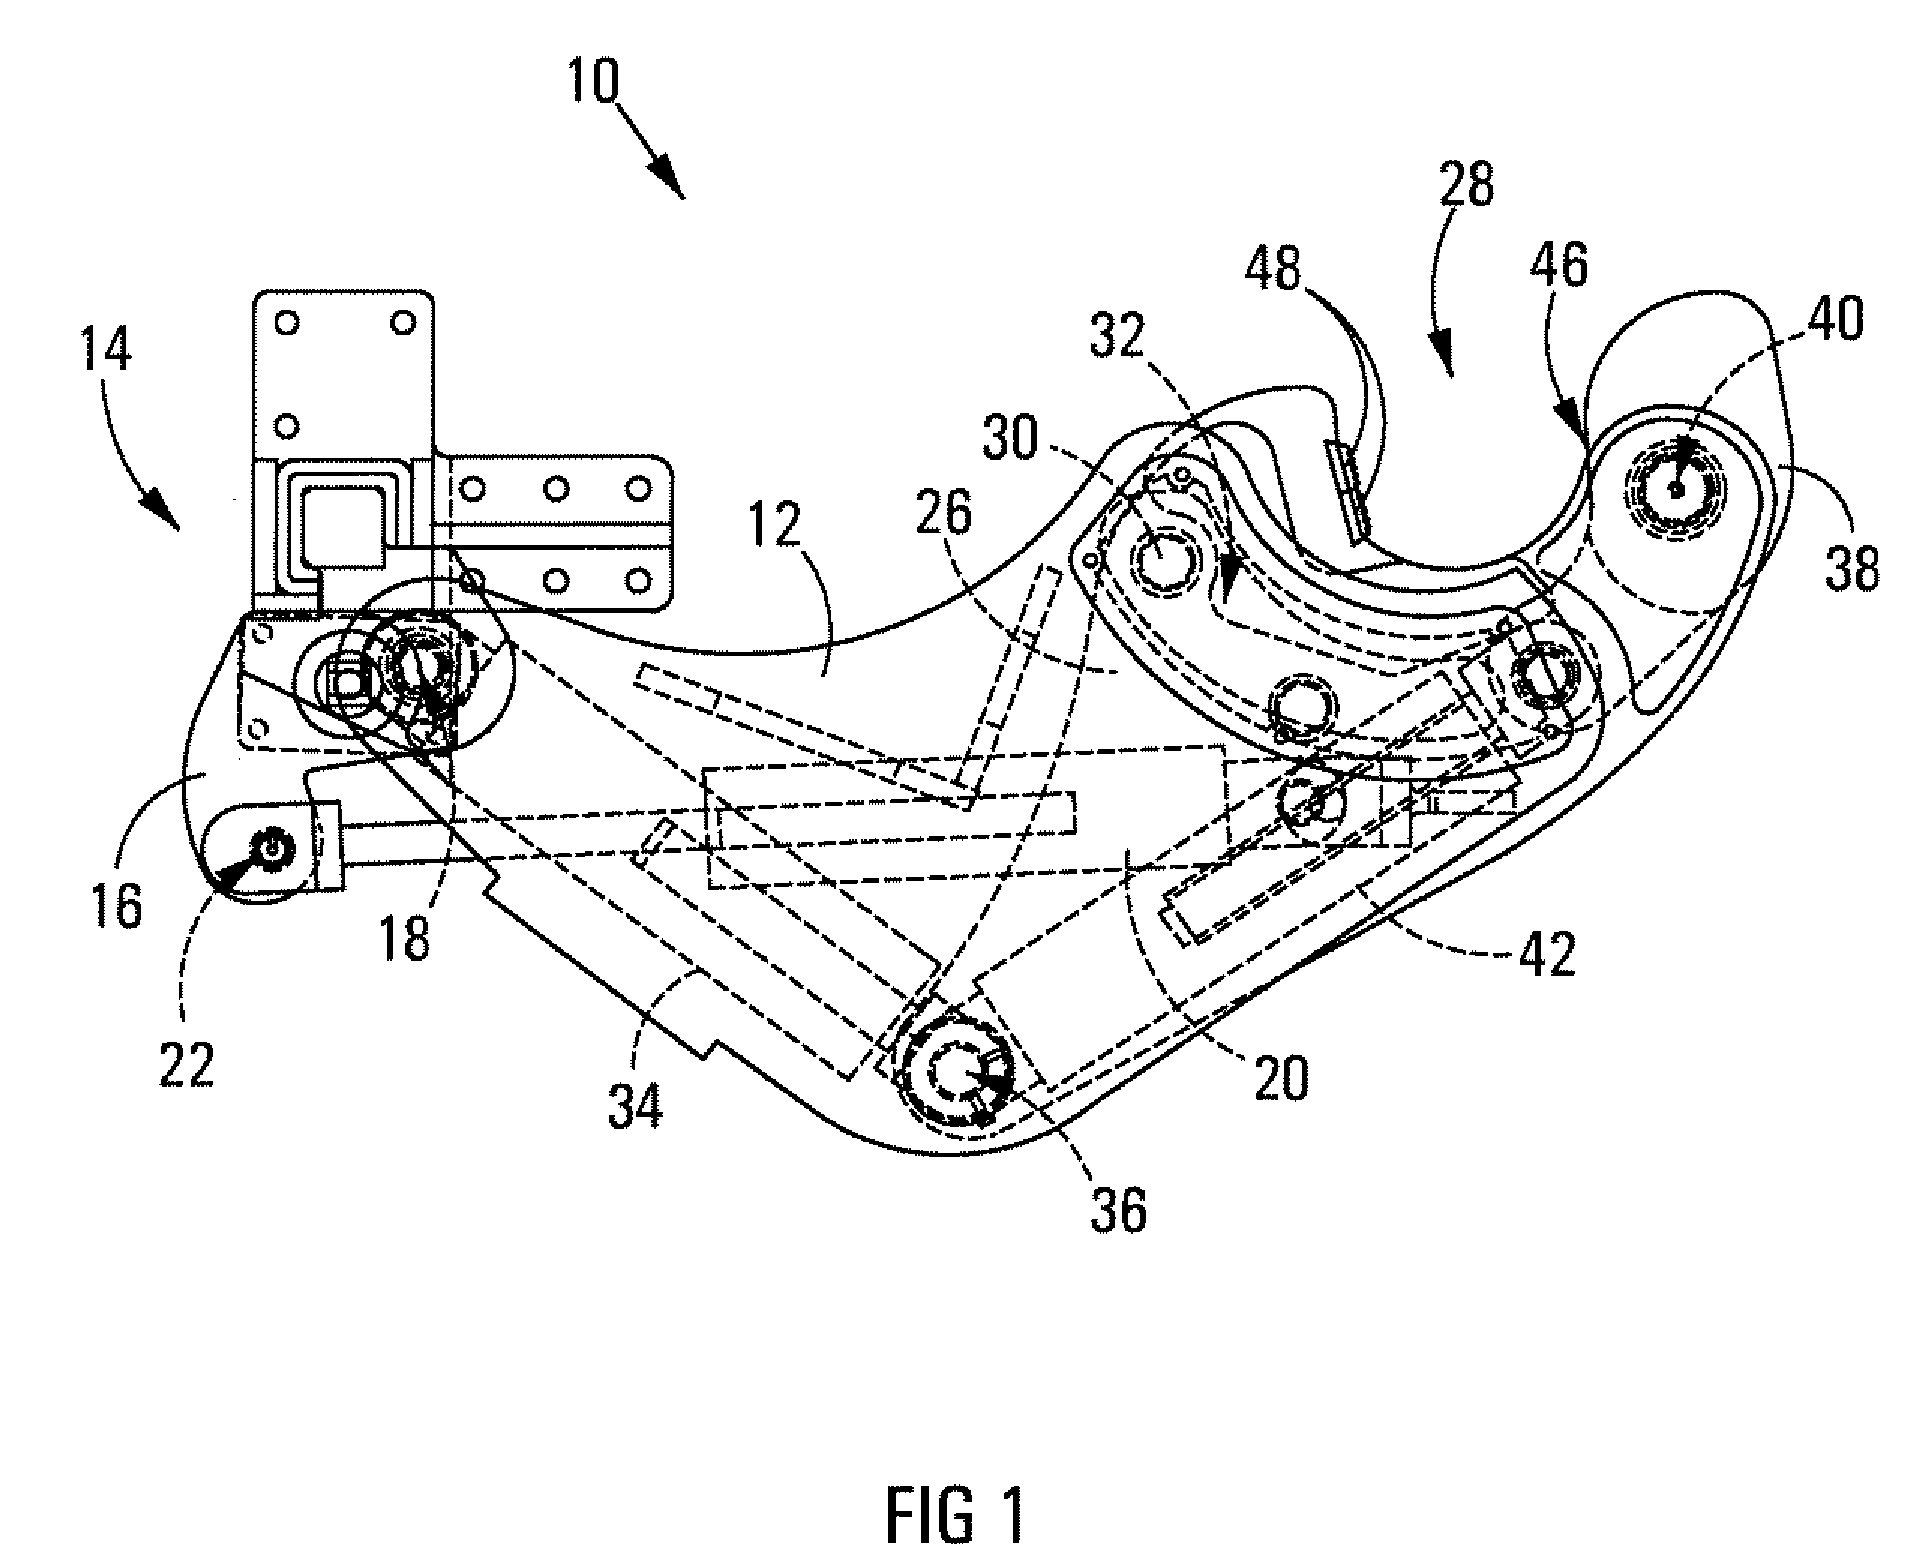 Wrench for use with a drilling apparatus